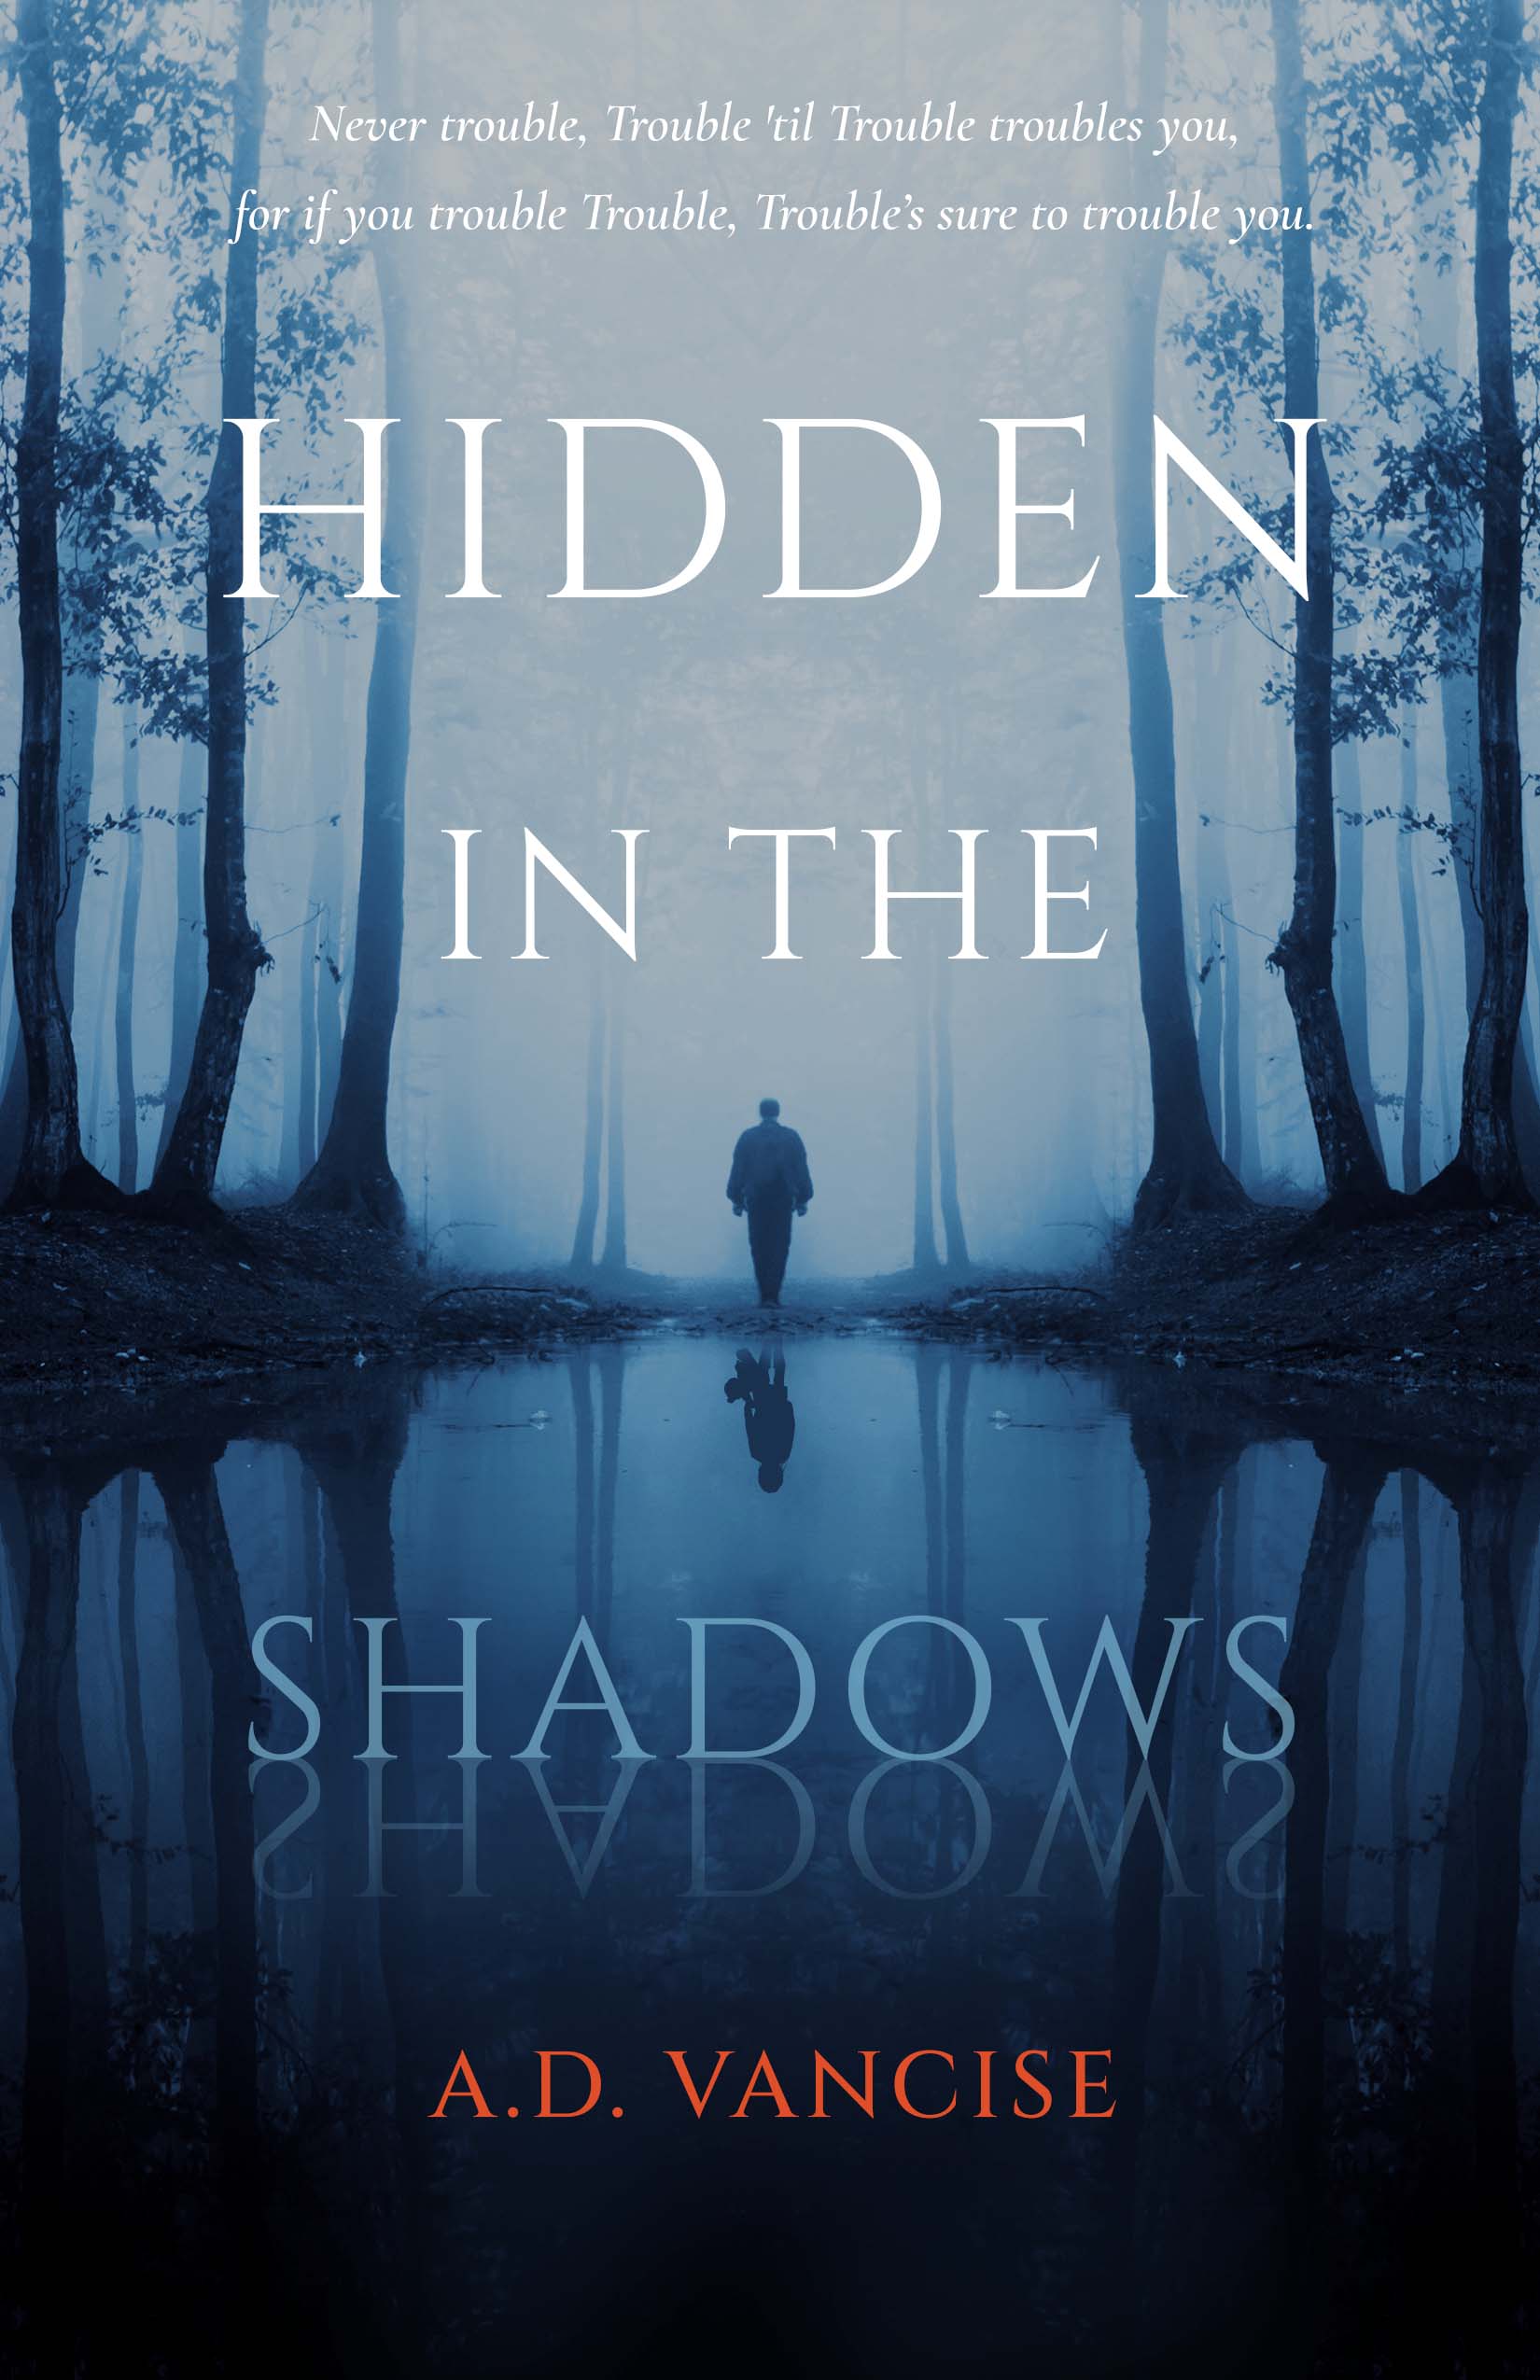 Hidden in the Shadows by A.D. Vancise